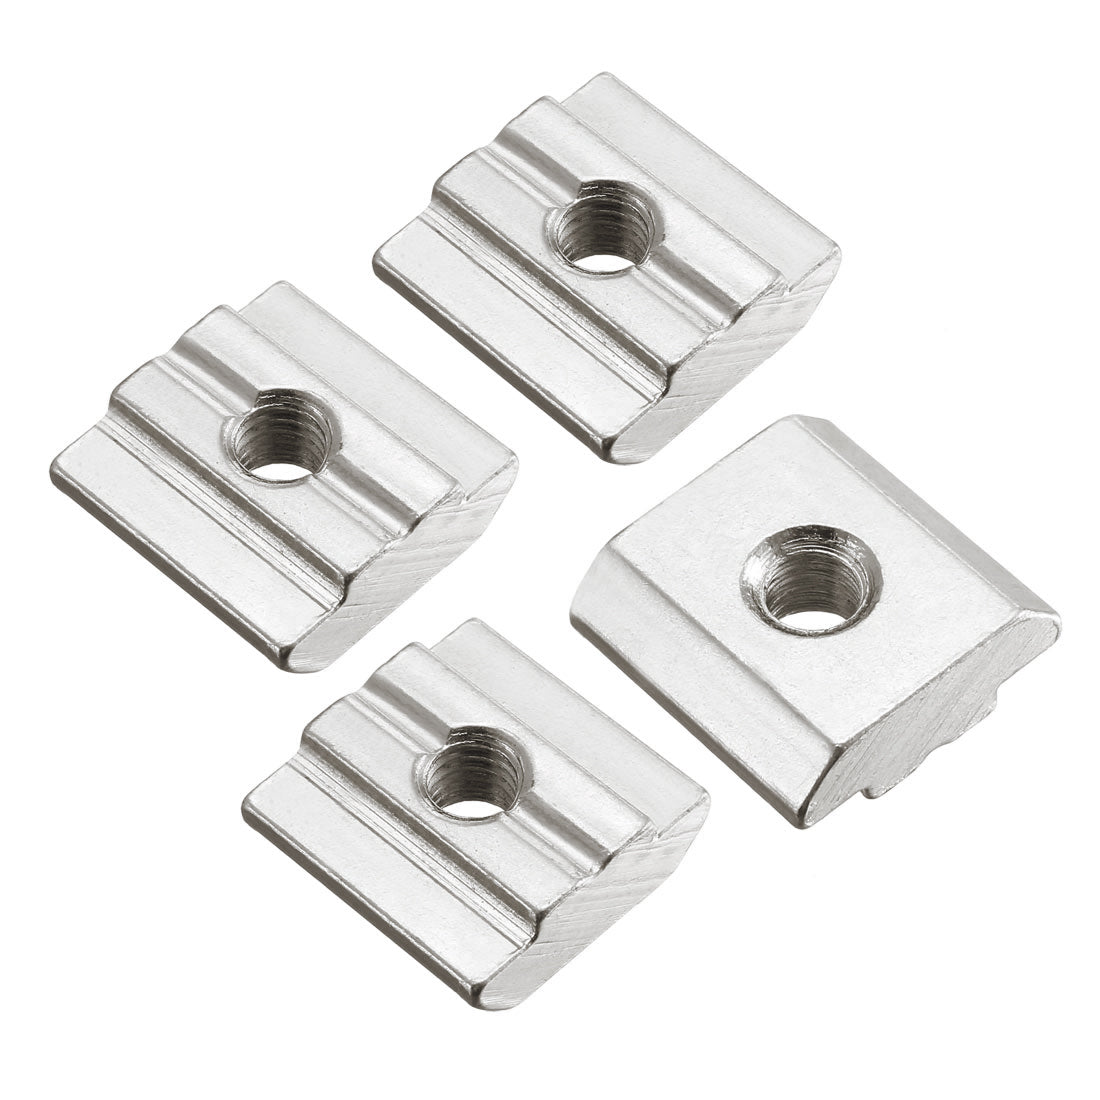 Uxcell Uxcell Slide in T-Nut, M6 Threaded for 3030 Series Aluminum Extrusions Profile 4pcs